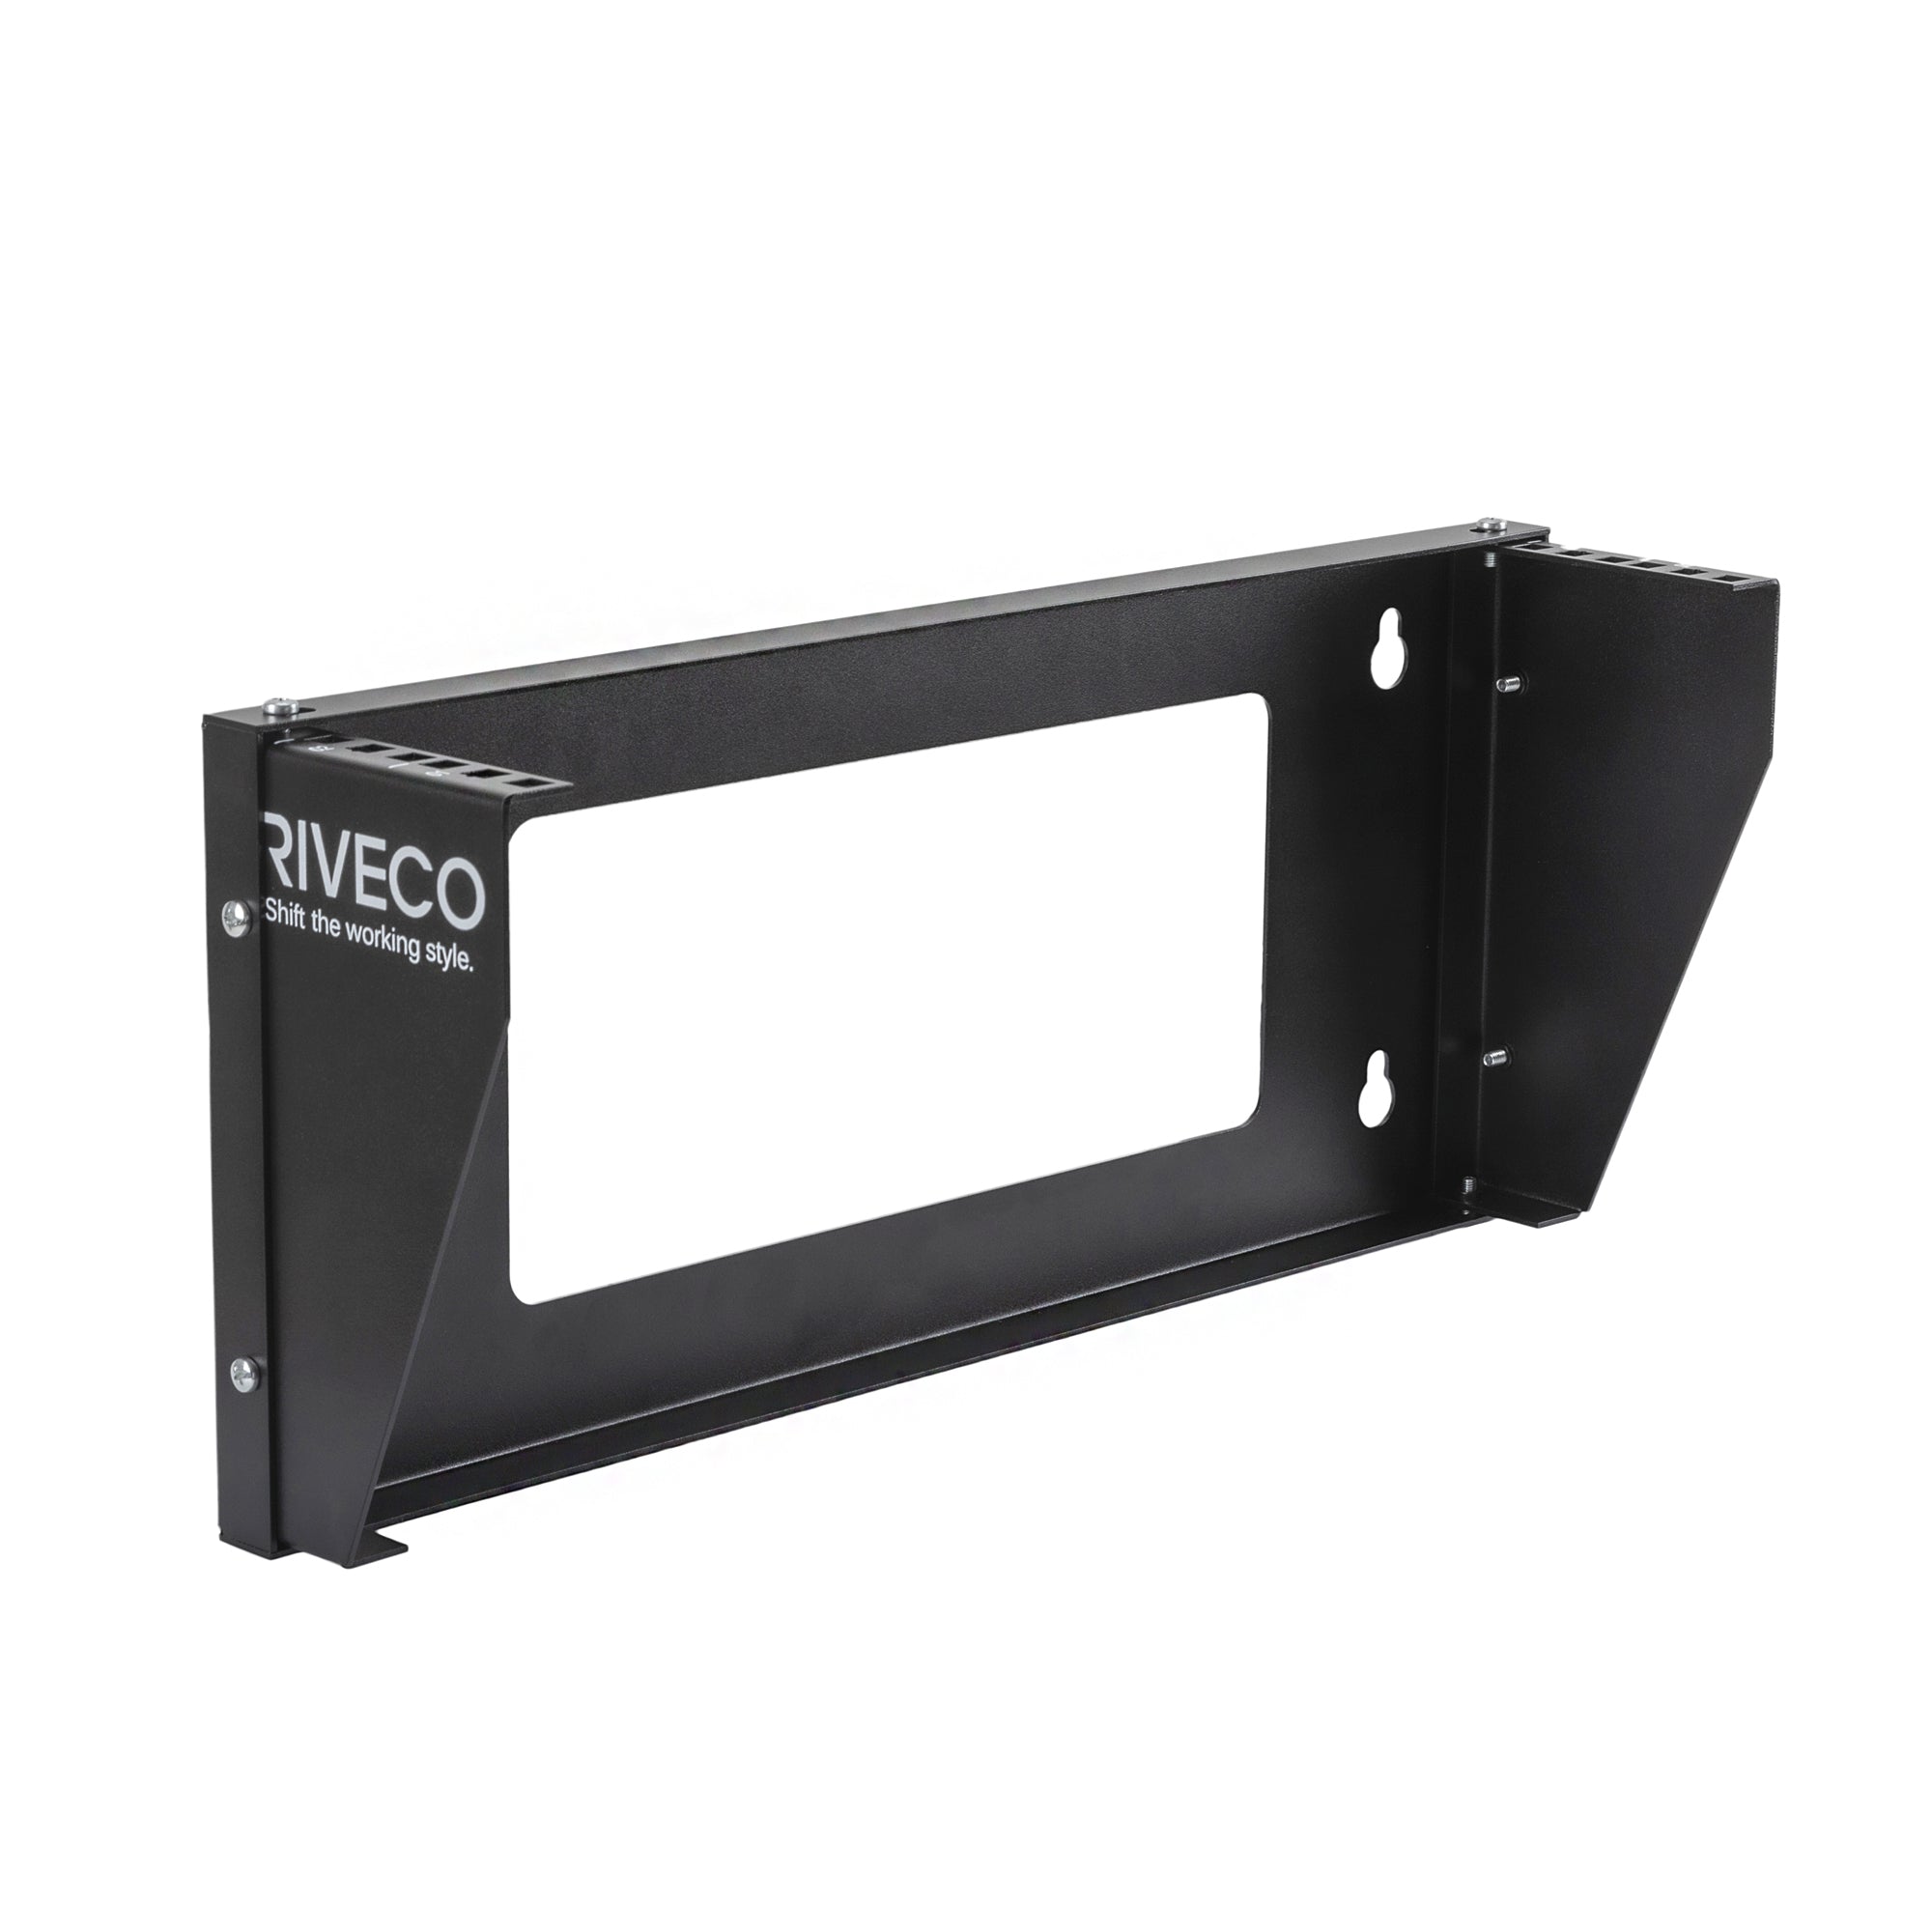 RIVECO Wall Mount Rack for Network| Reinforced Heavy Load 66-99